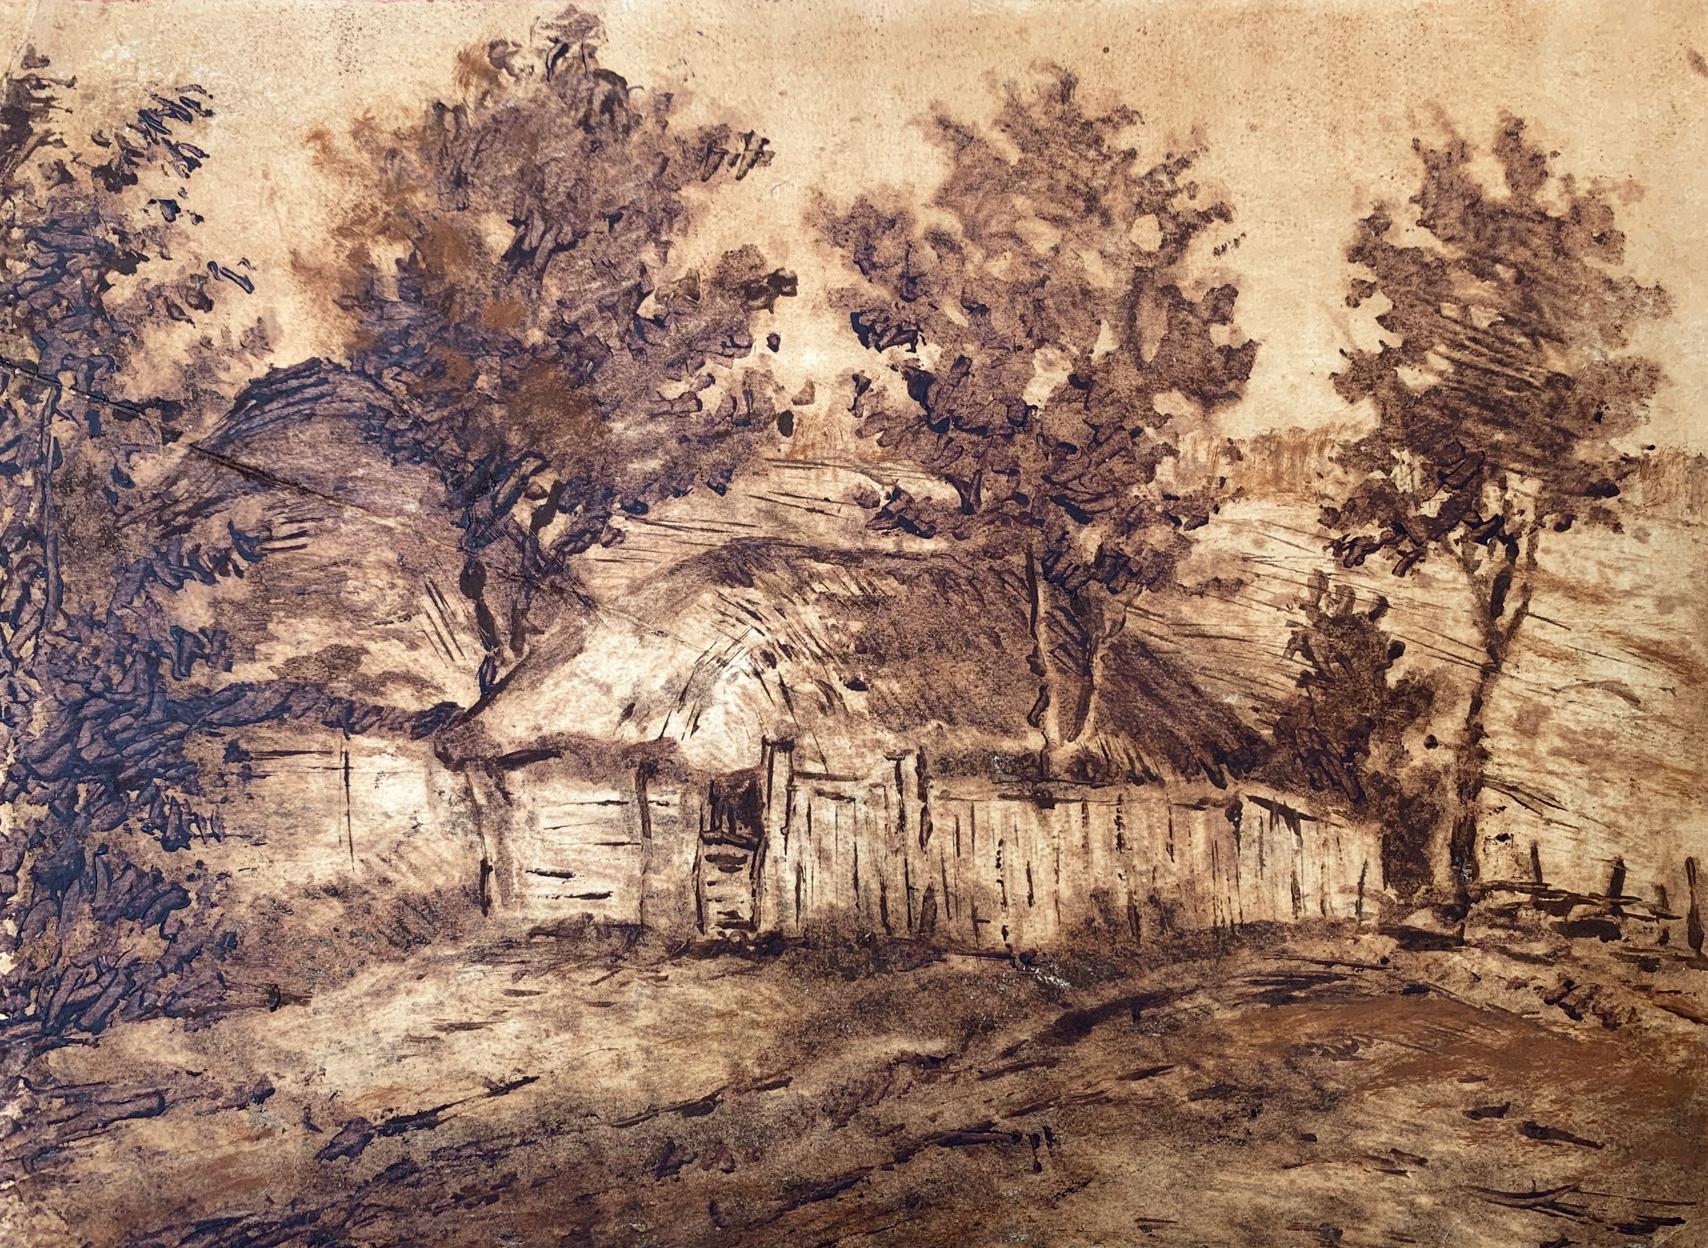 Sepia painting A lonely house in the forest A. G. Cherkas